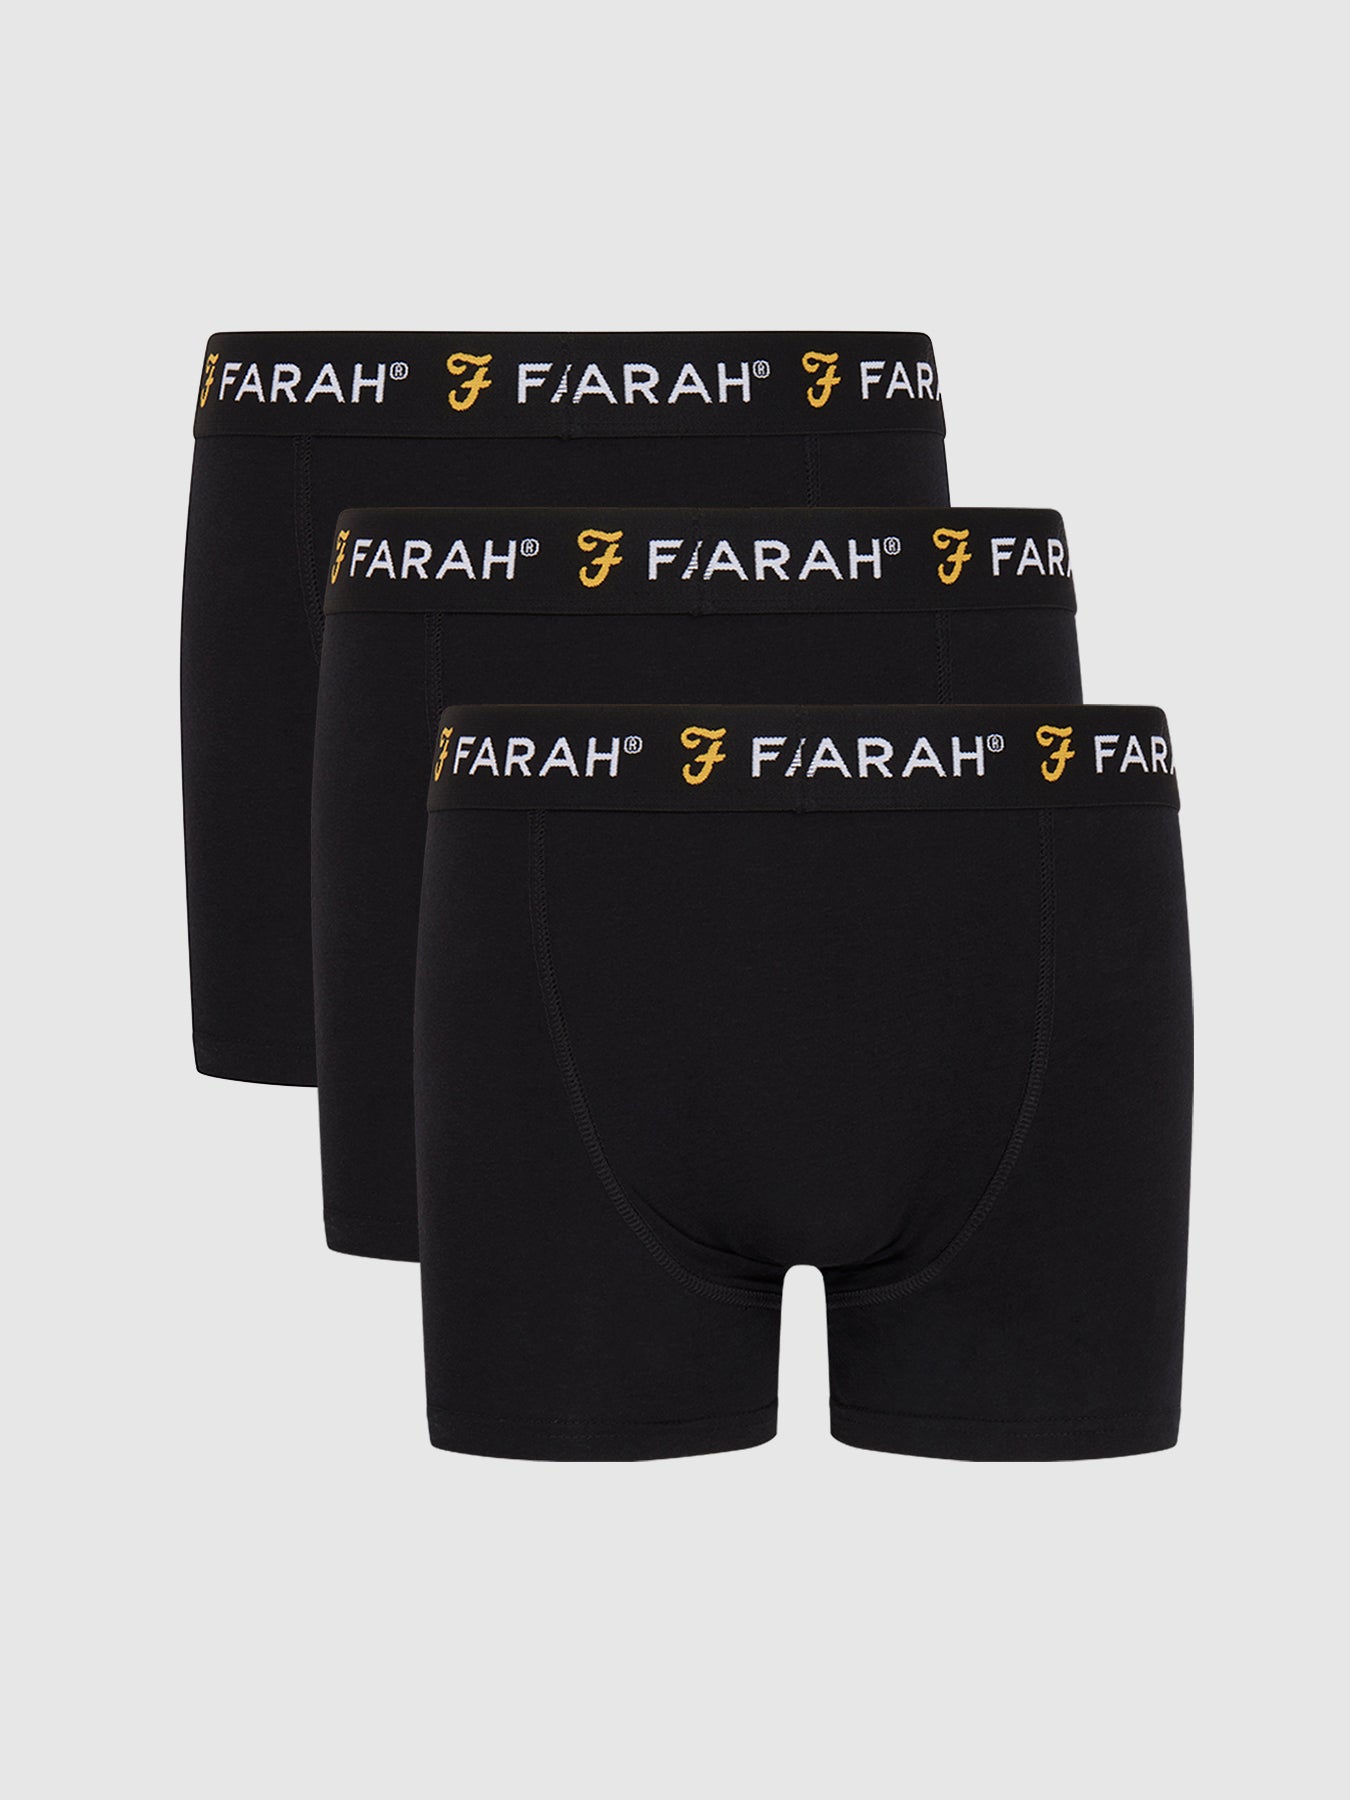 View Saginaw 3 Pack Boxers In Black information